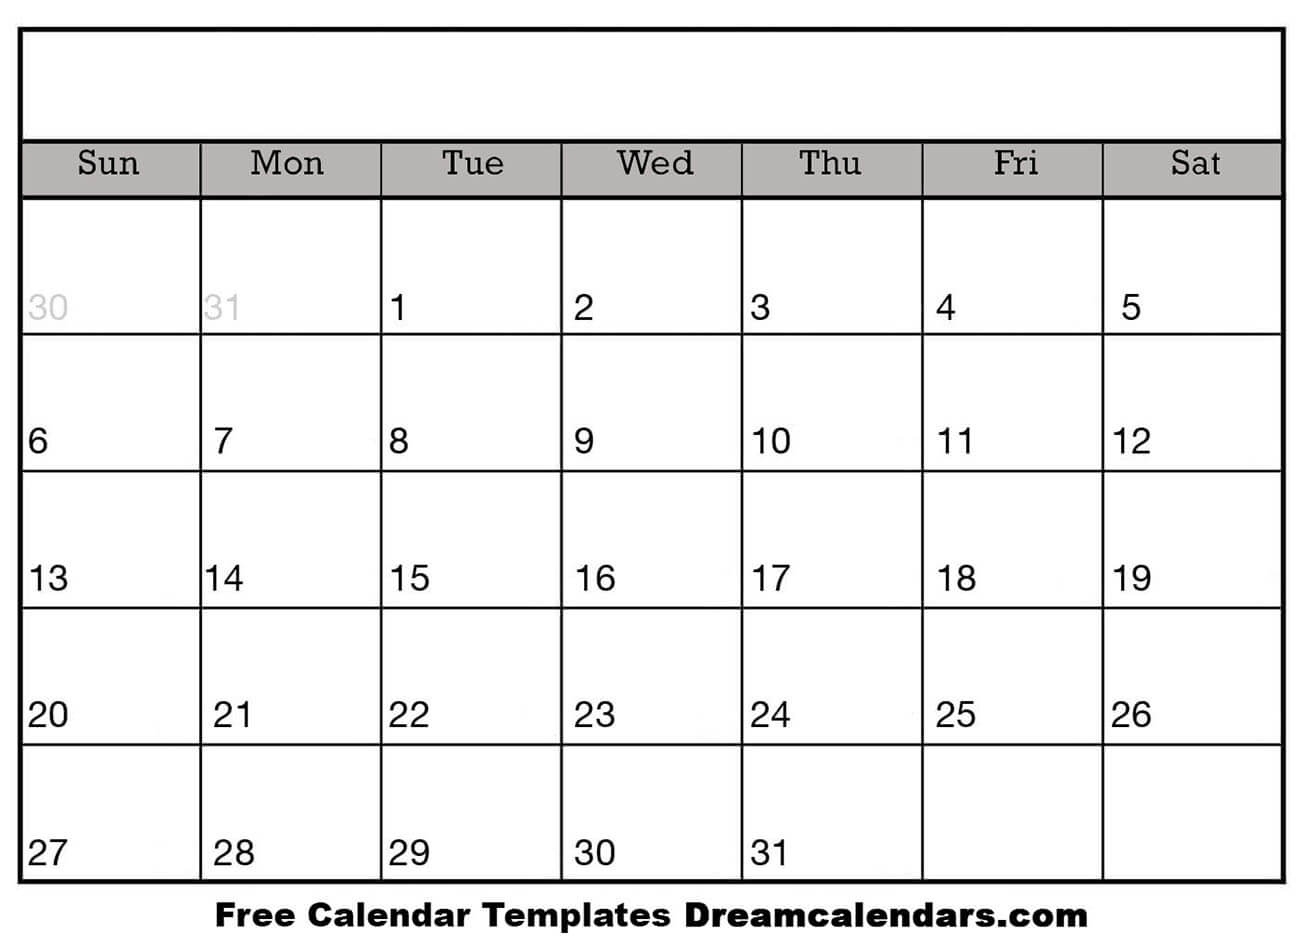 Dashing Blank Calenders With No Dates Printable Blank Calendar Template